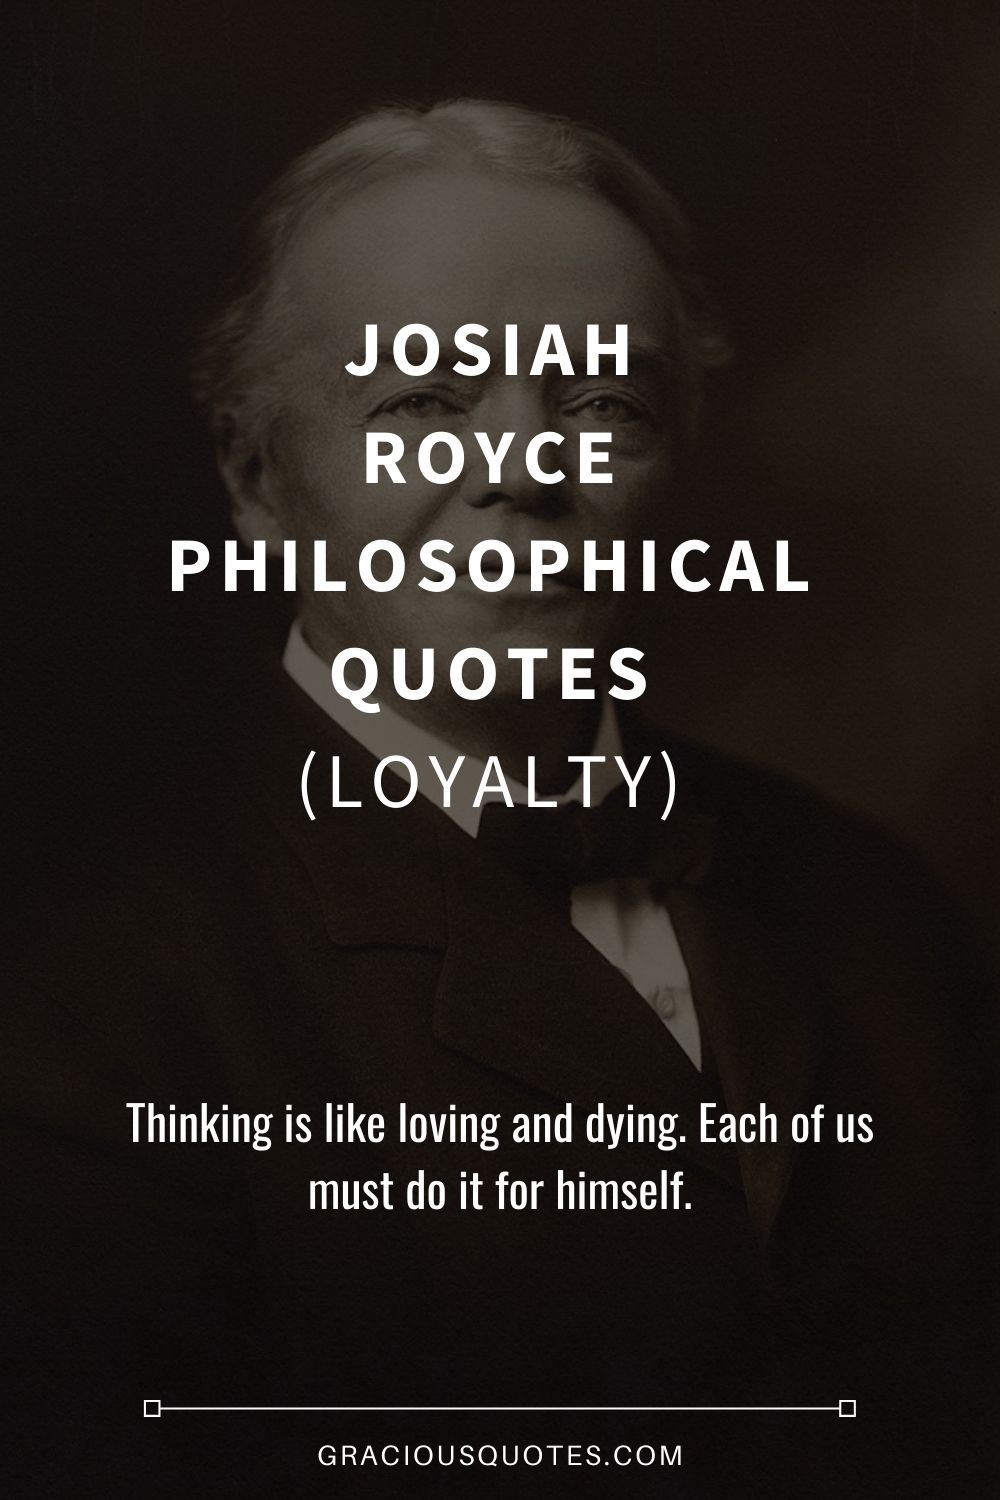 Josiah Royce Philosophical Quotes (LOYALTY) - Gracious Quotes